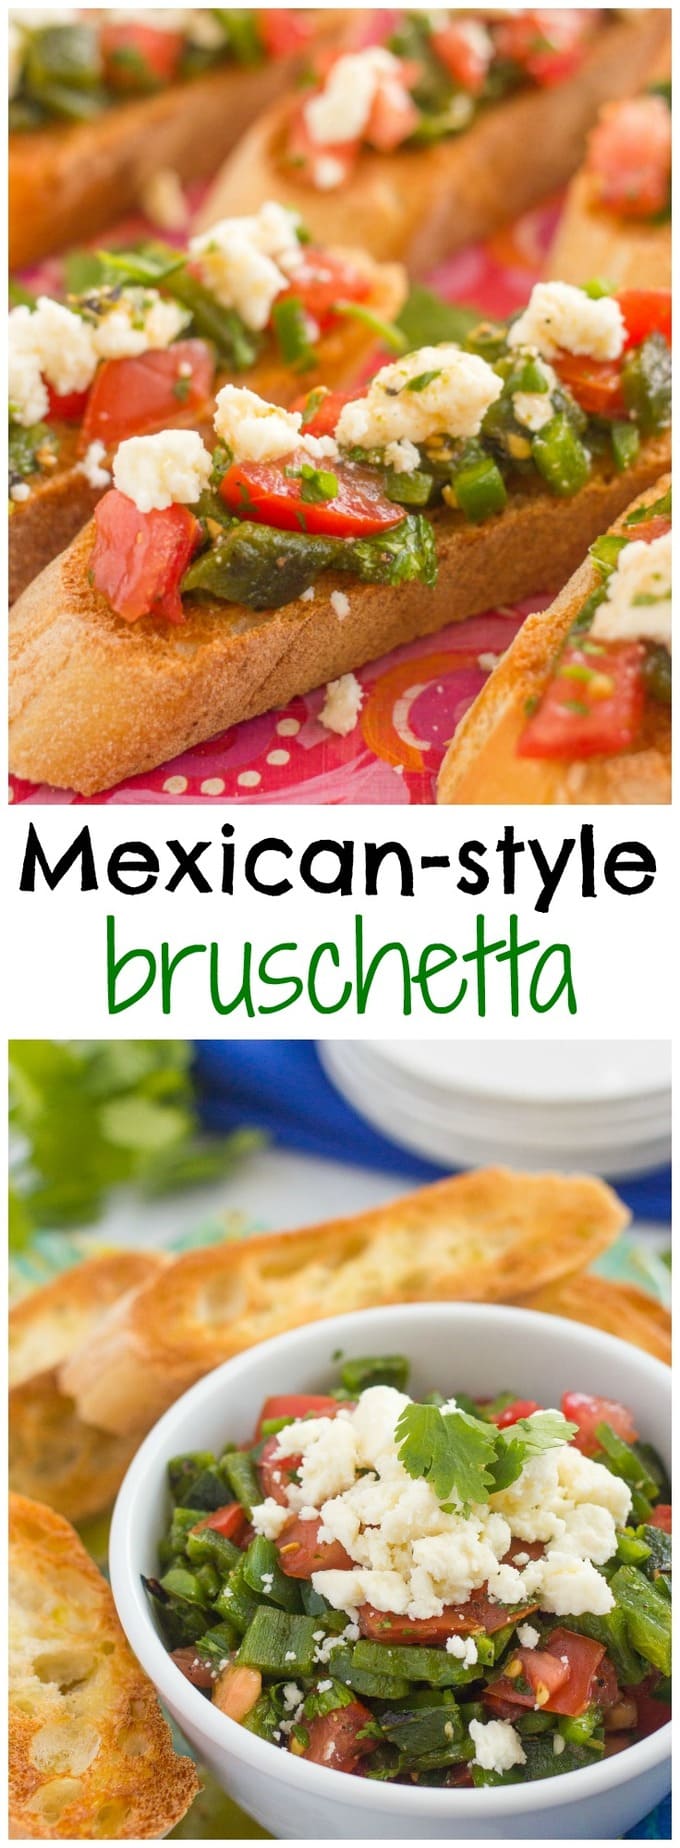 Photos of Mexican bruschetta with a text box in the middle